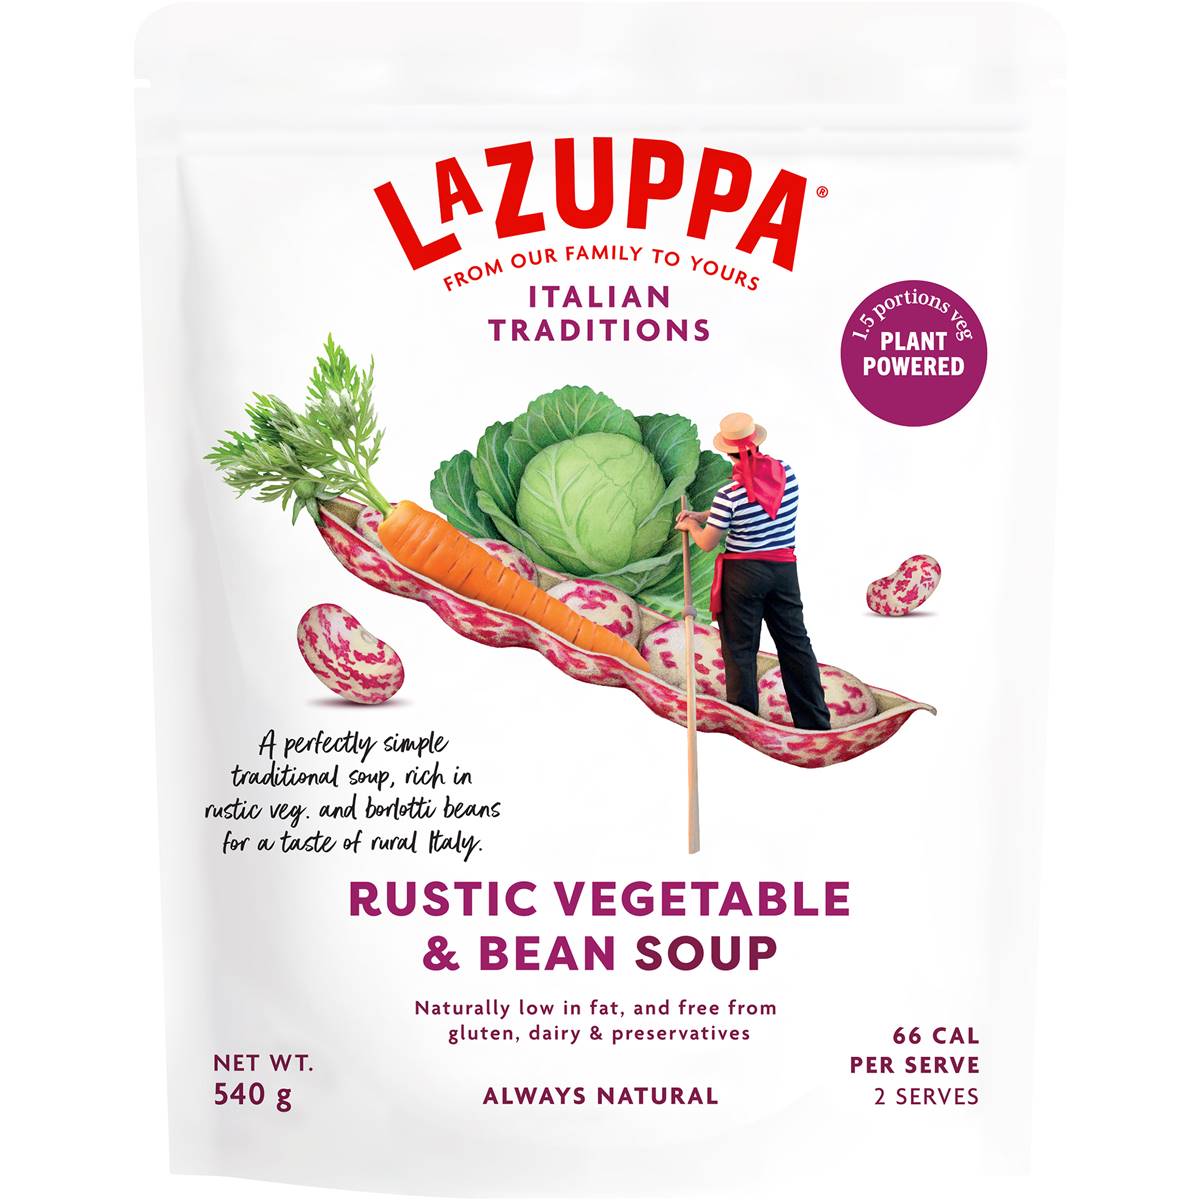 Calories in La Zuppa Soup Pouch Rustic Vegetable Rustic Vegetable